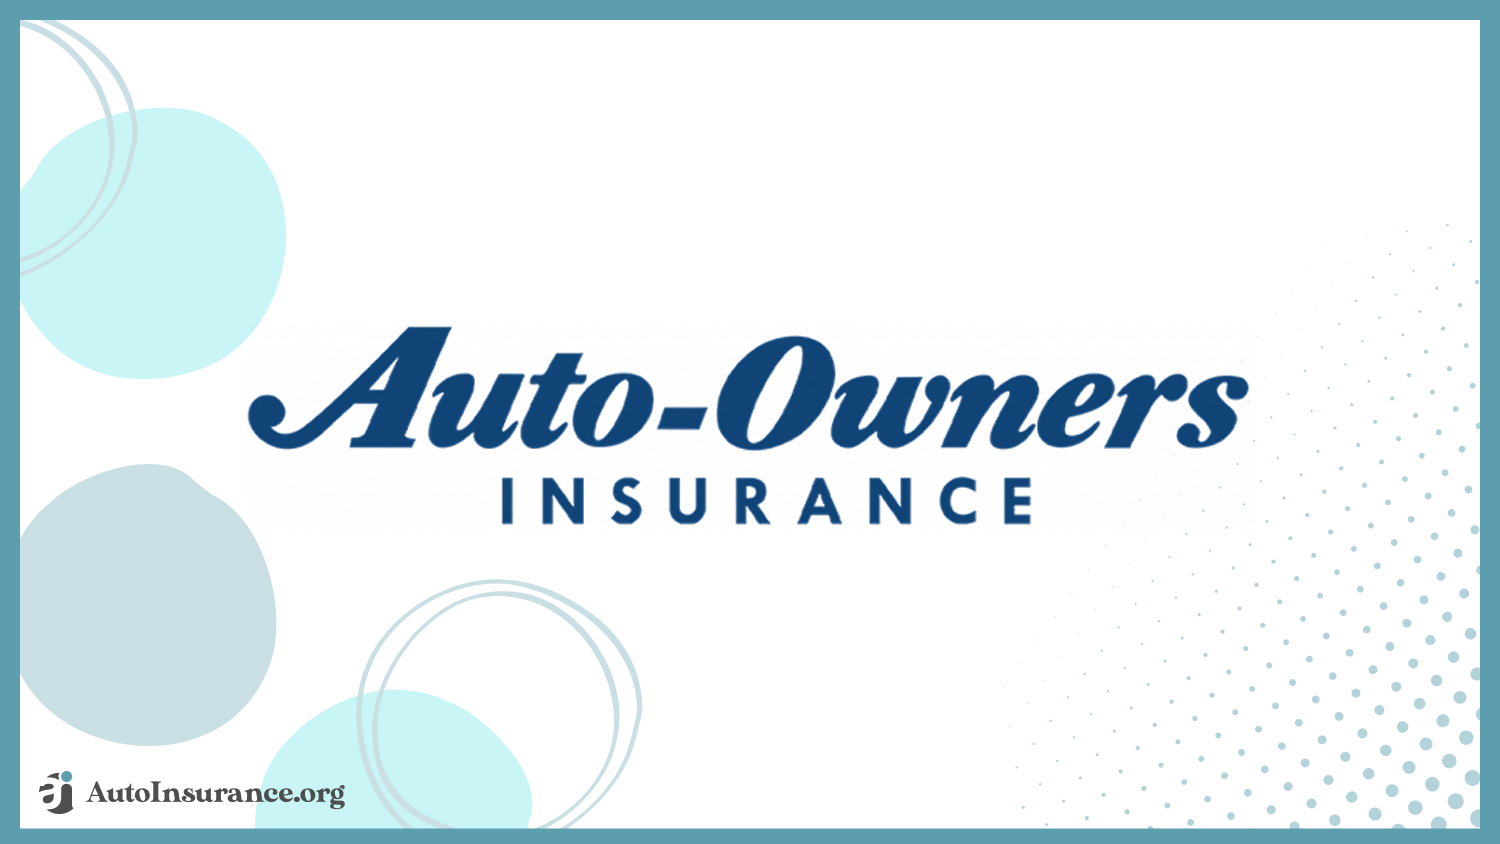 Auto-Owners: Cheap Auto Insurance for Occasional Drivers